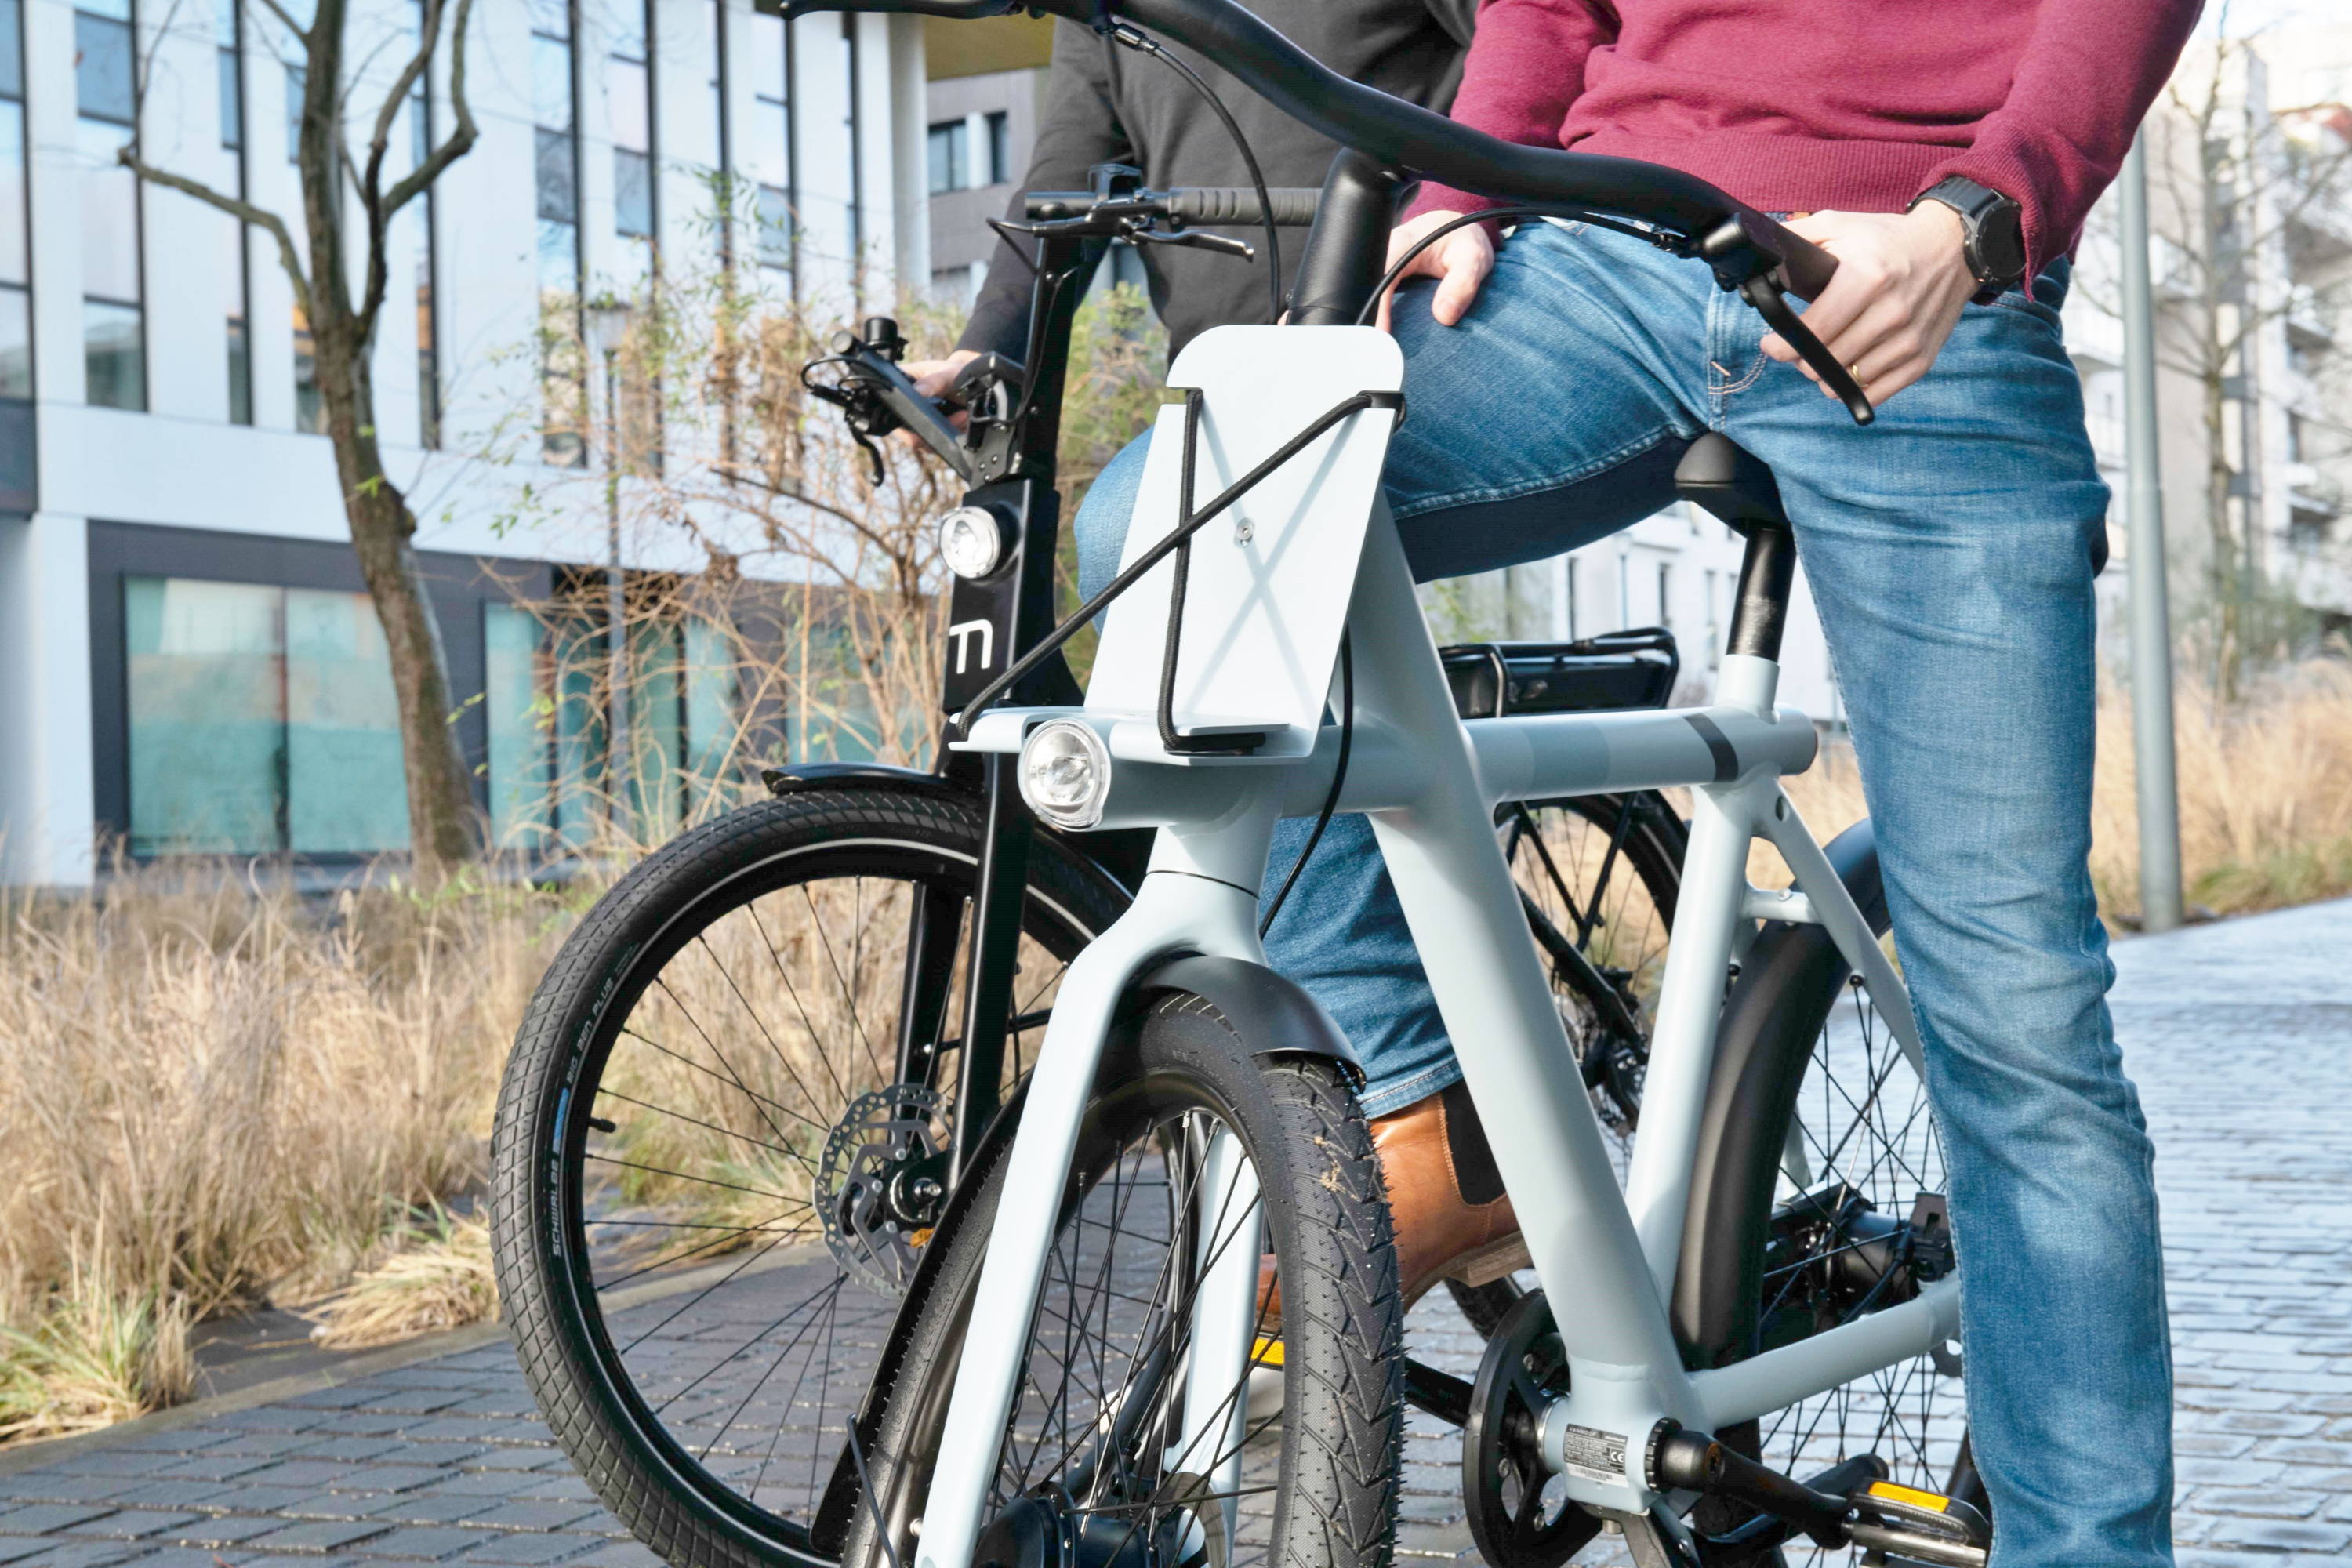 Close-up on the frame of two electric bikes ridden by two men.